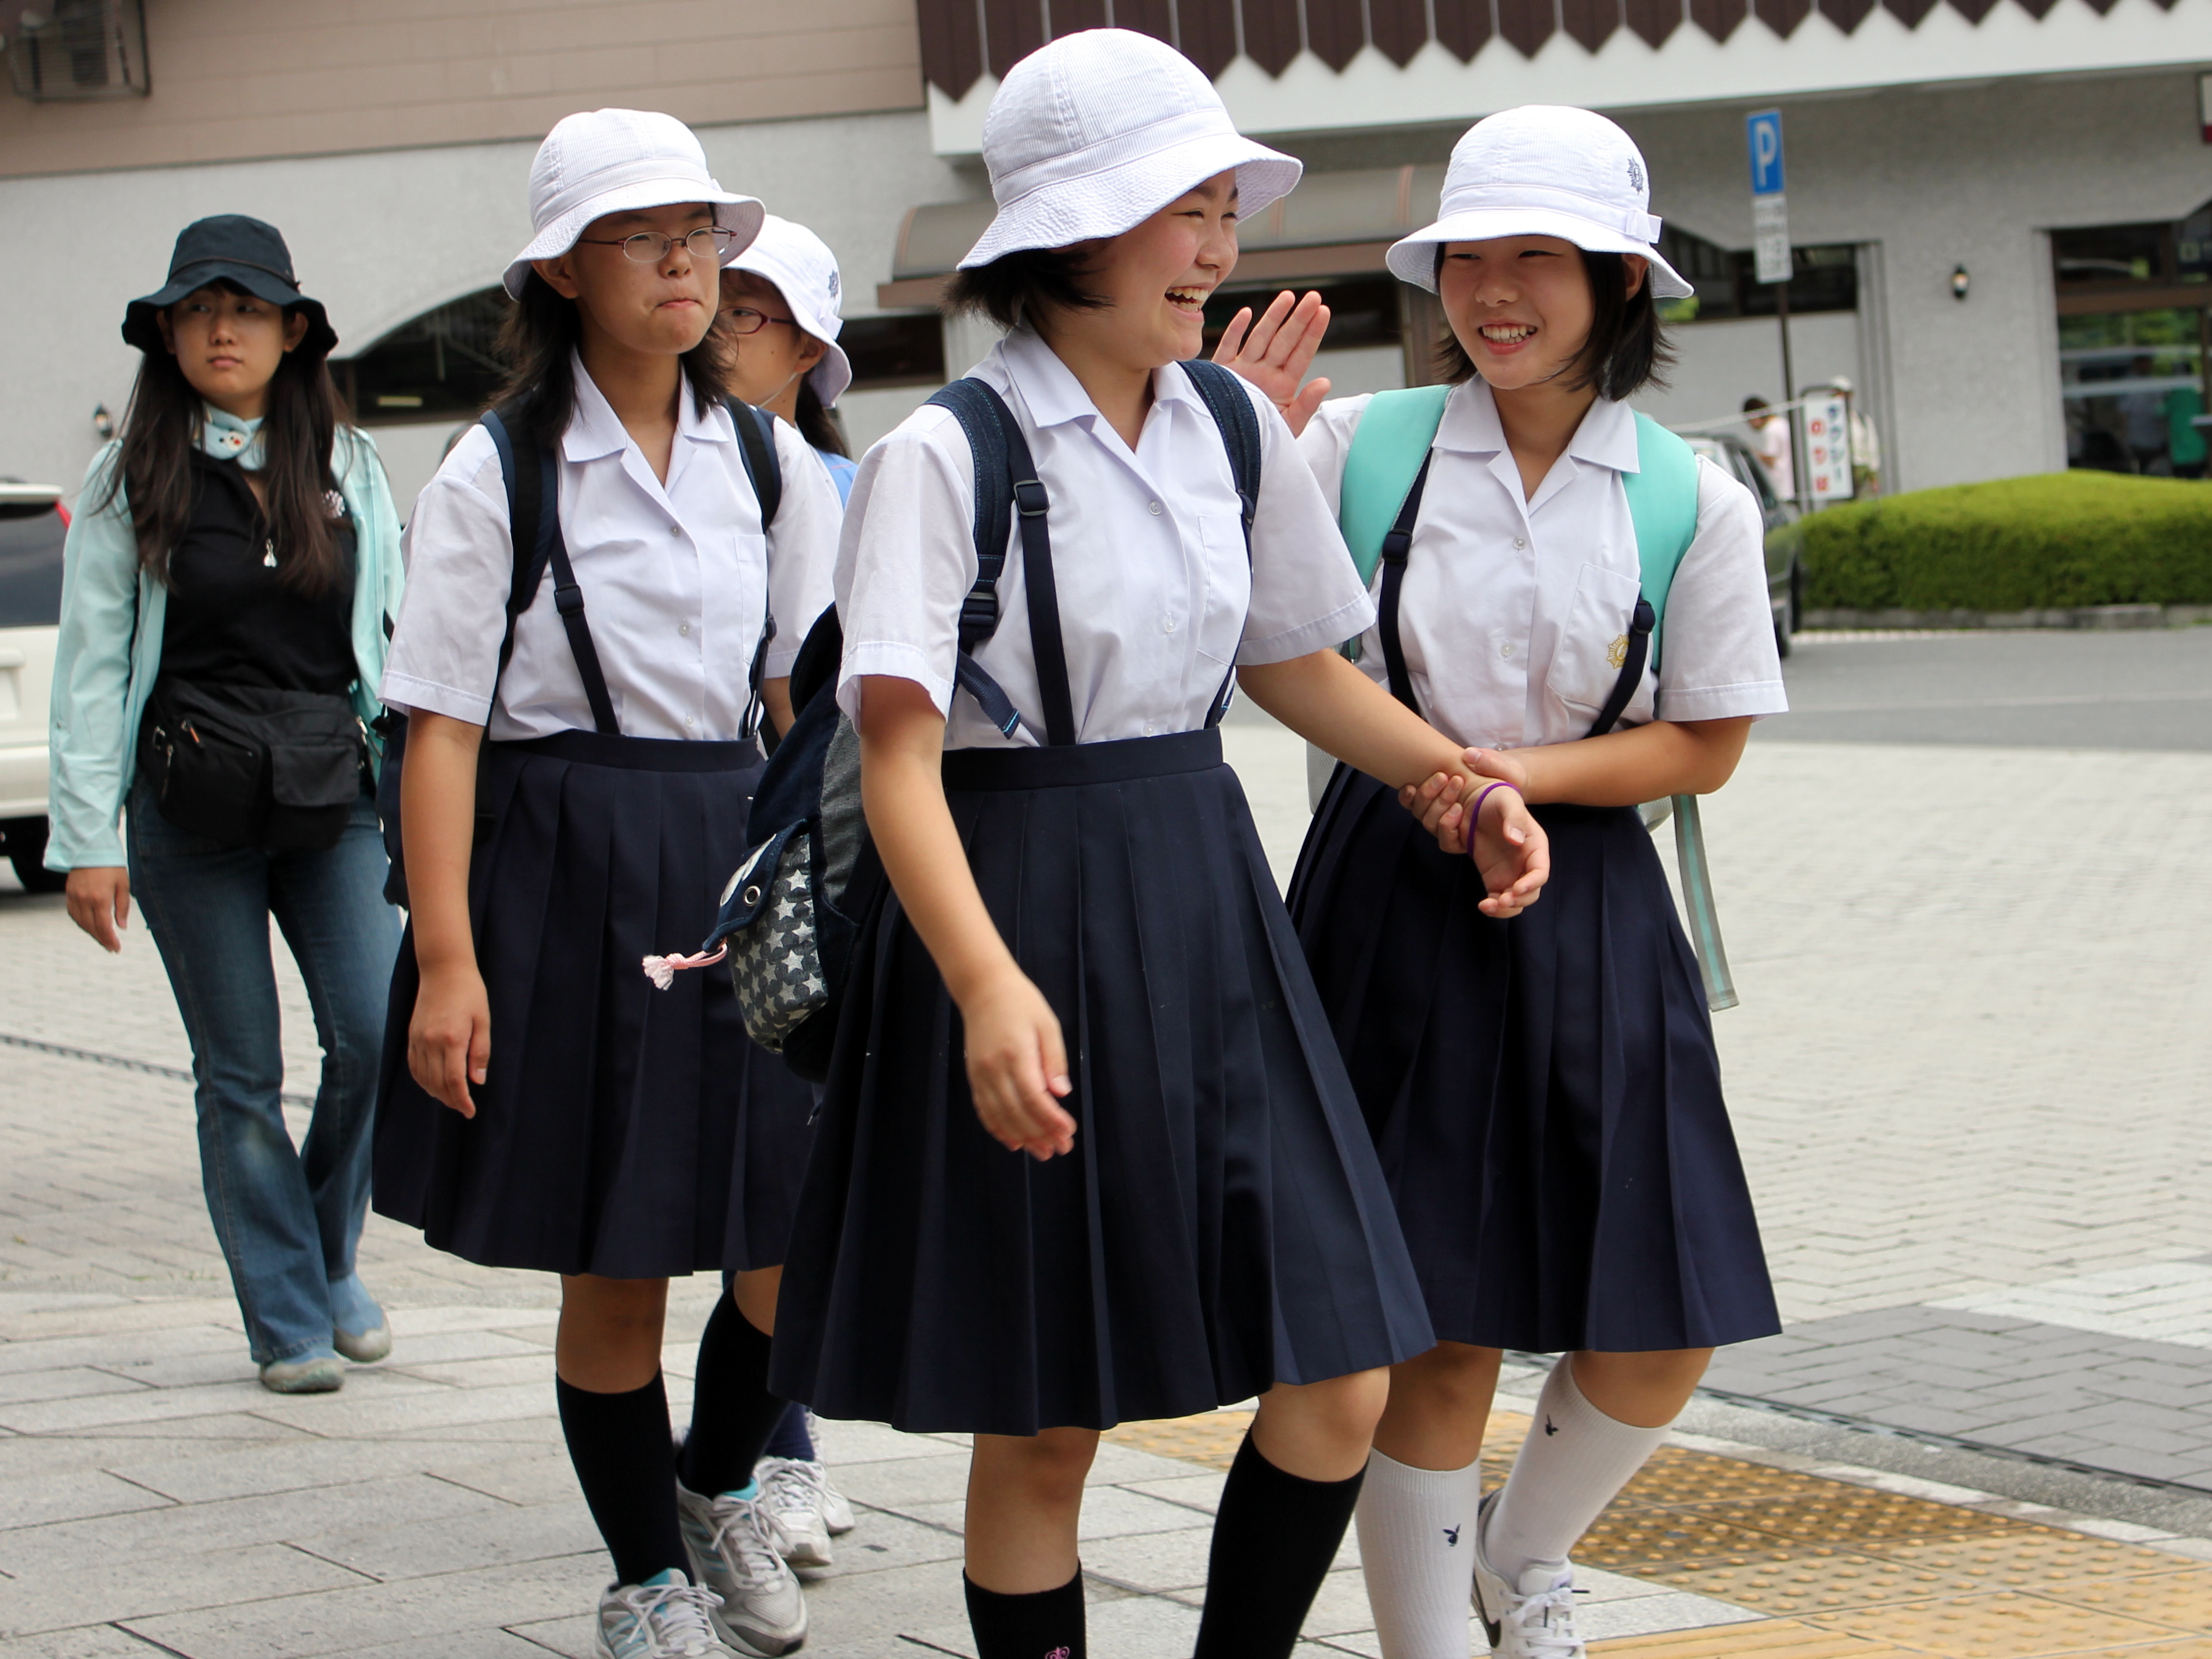 darran williams recommends japanese school girls photo pic